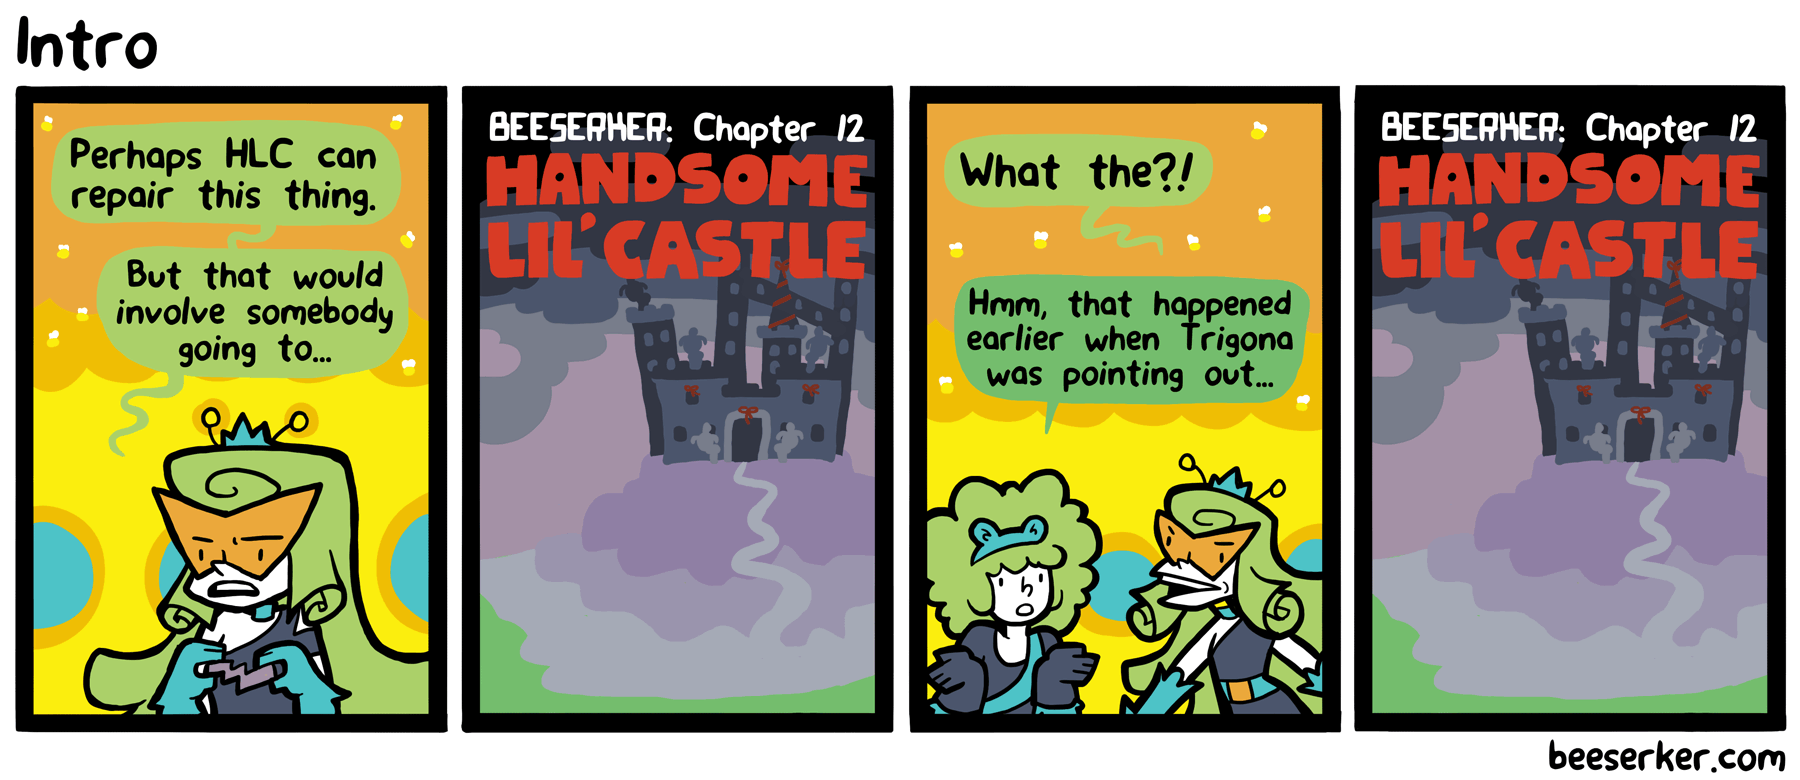 Looks like that castle doesn't change shape every time somebody looks at it after all.